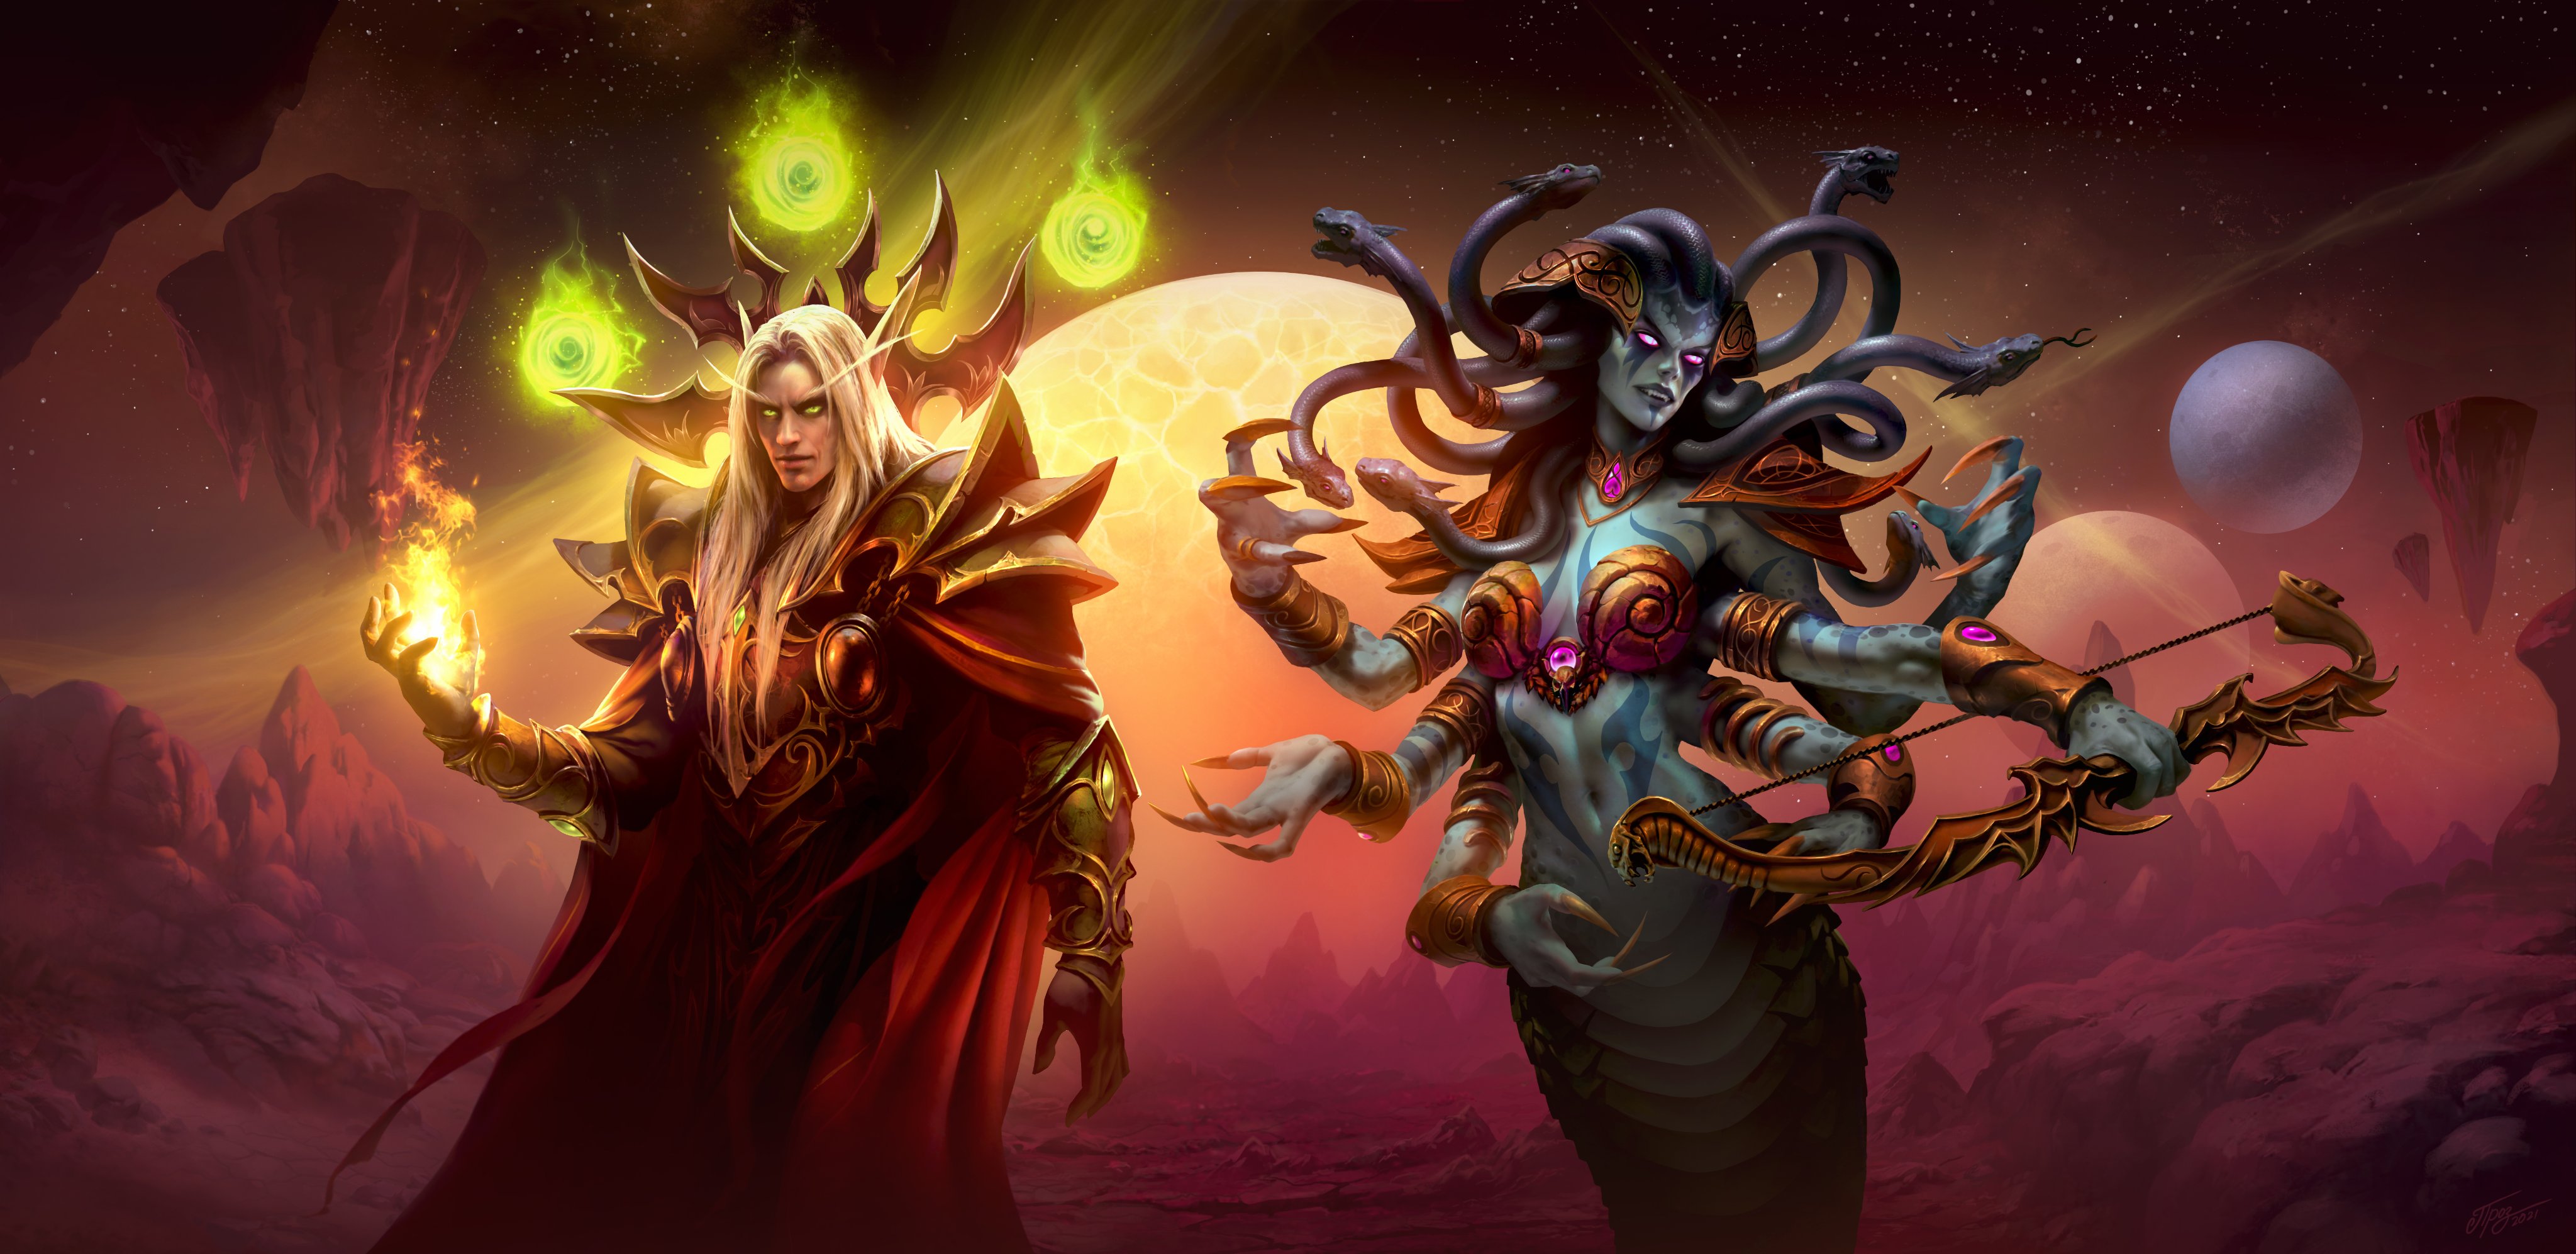 Wallpaper World of warcraft Overlords of outland